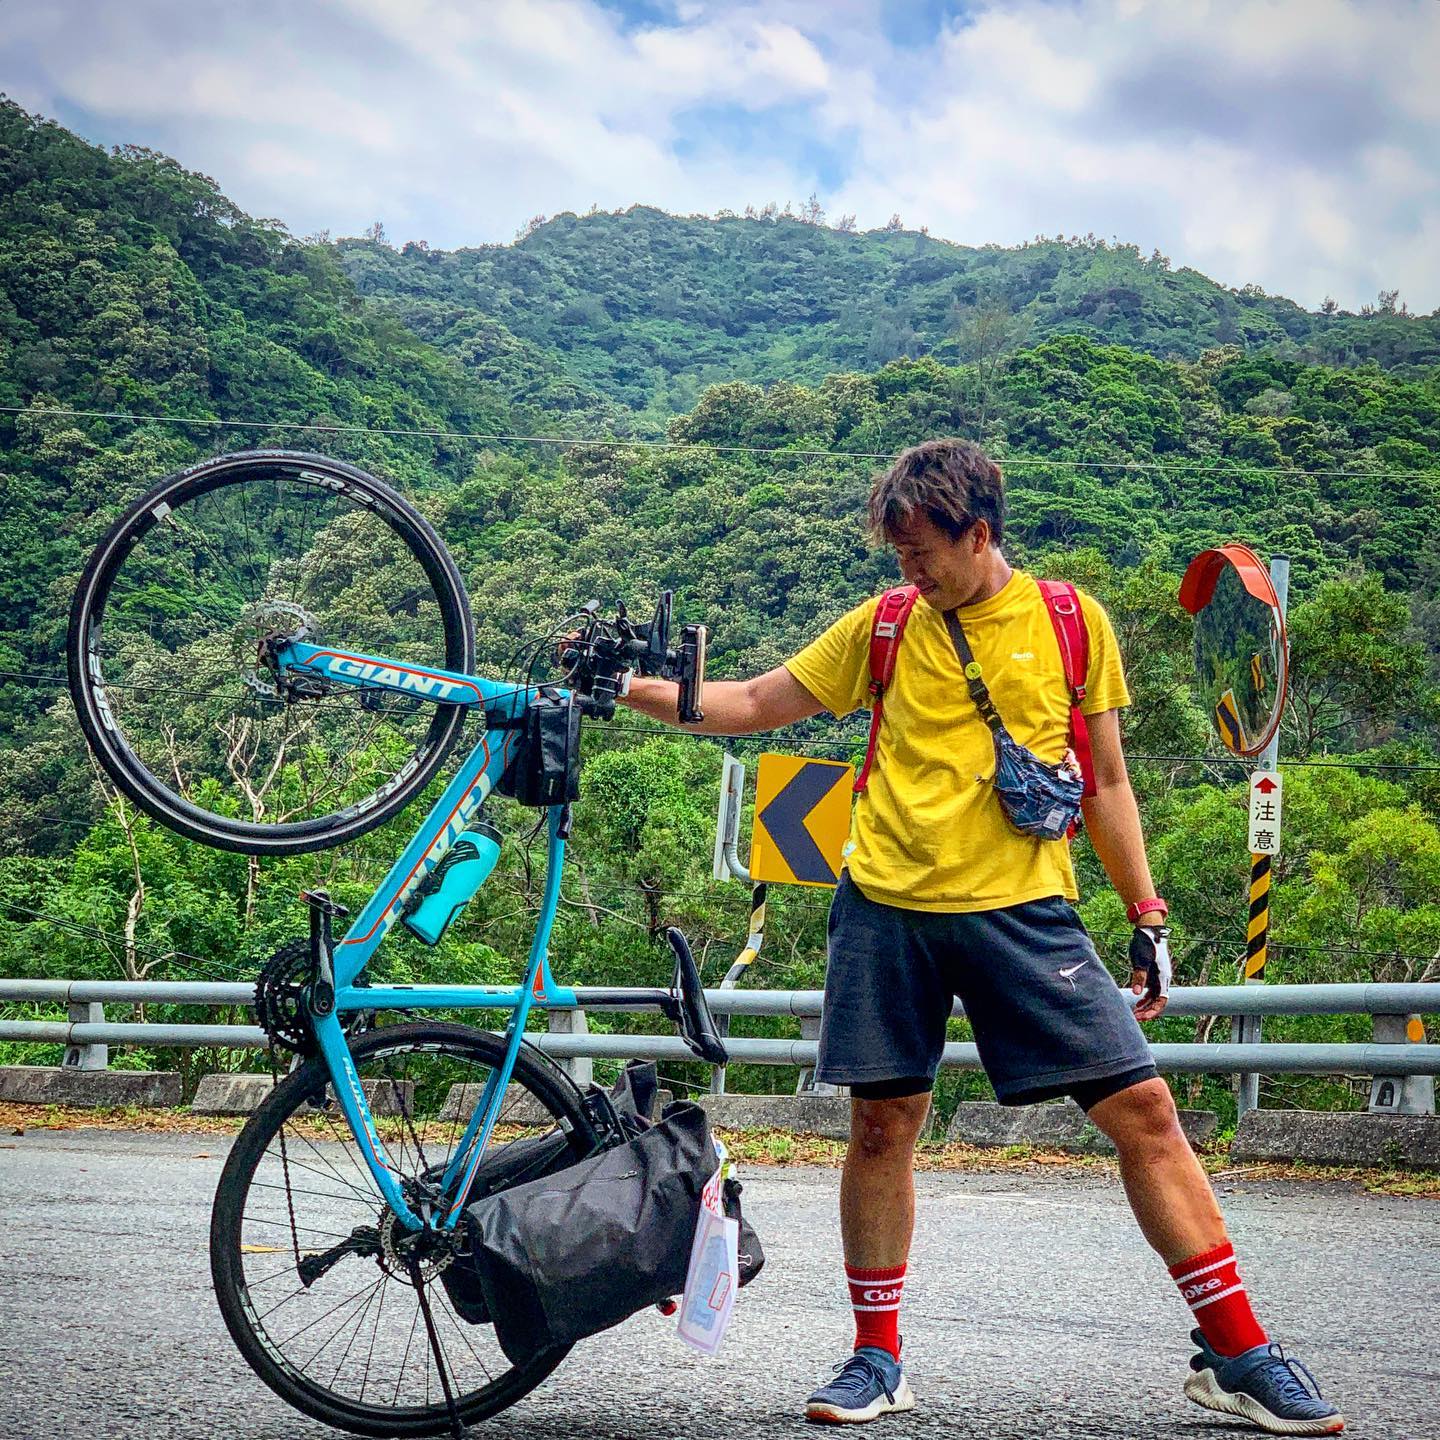 The Malaysian YouTuber Ccwhyao had a 100-day bicycle trip traveling around Taiwan. (Photo / Authorized & Provided by the 西西歪 Ccwhyao)